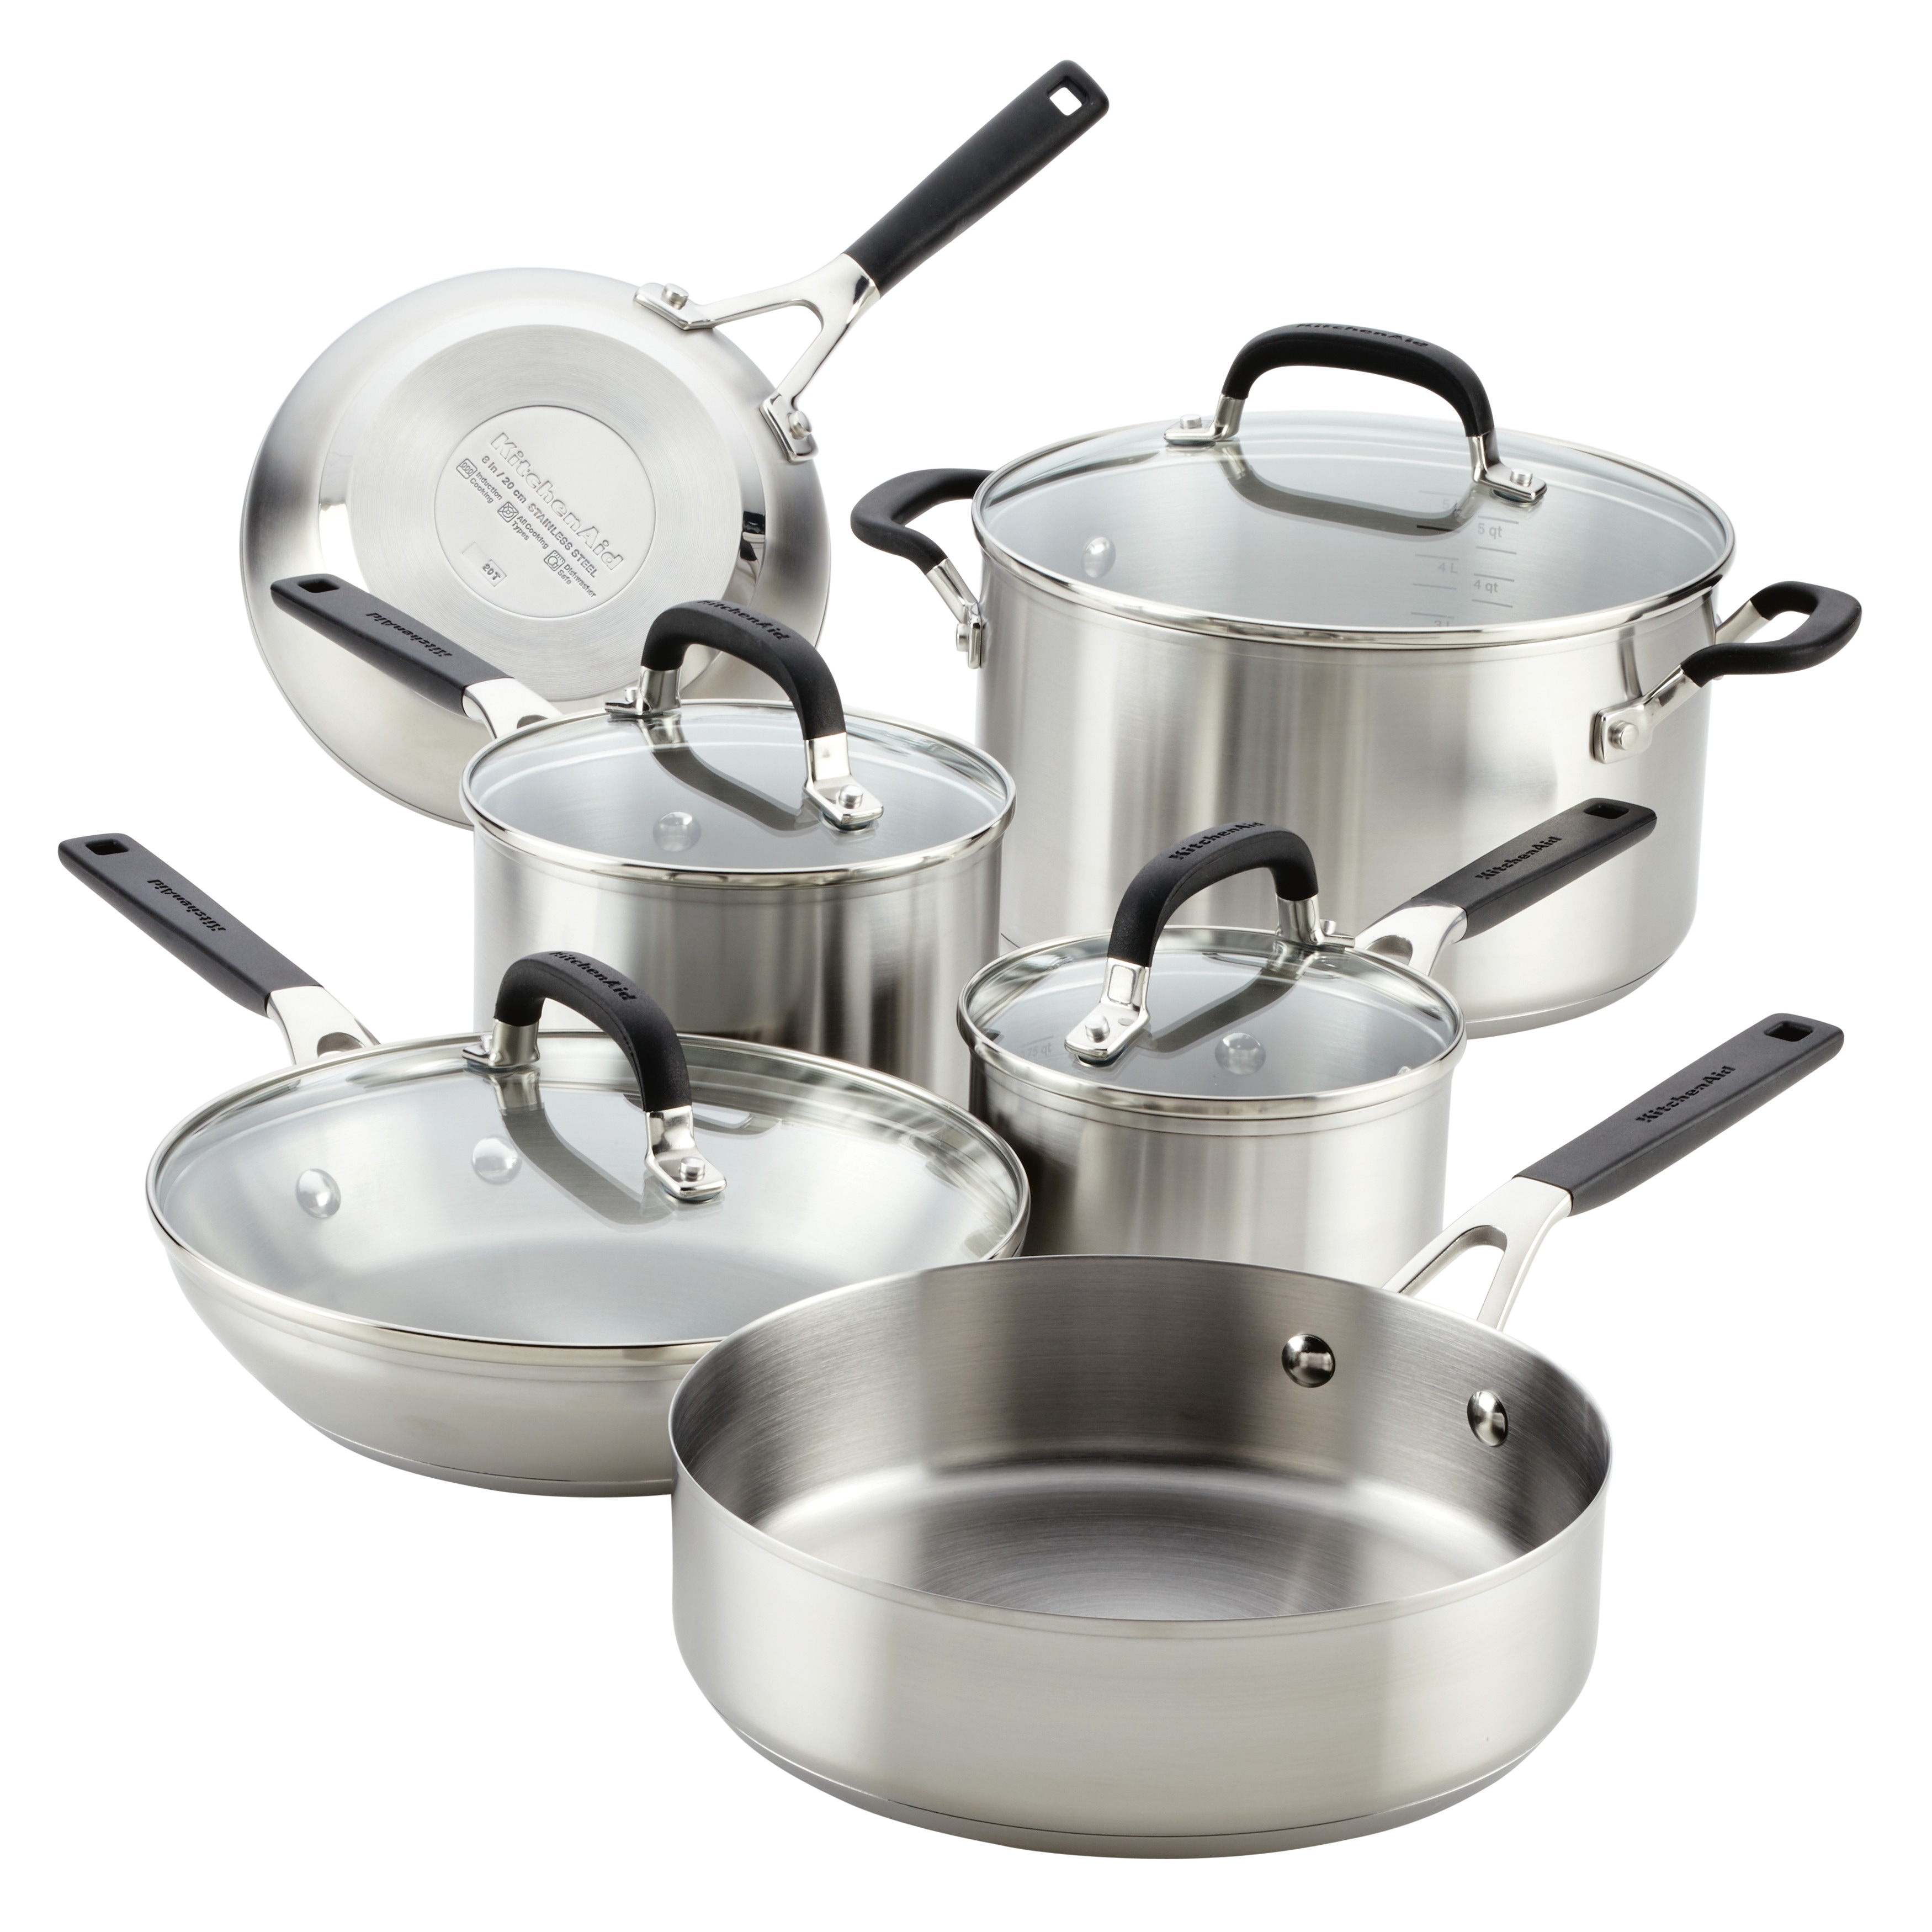 https://ak1.ostkcdn.com/images/products/is/images/direct/ca69bf4f5b0da0aca8c1a11d78ac1eb3e86fce2e/KitchenAid-Stainless-Steel-Cookware-Set%2C-10-Piece%2C-Brushed.jpg